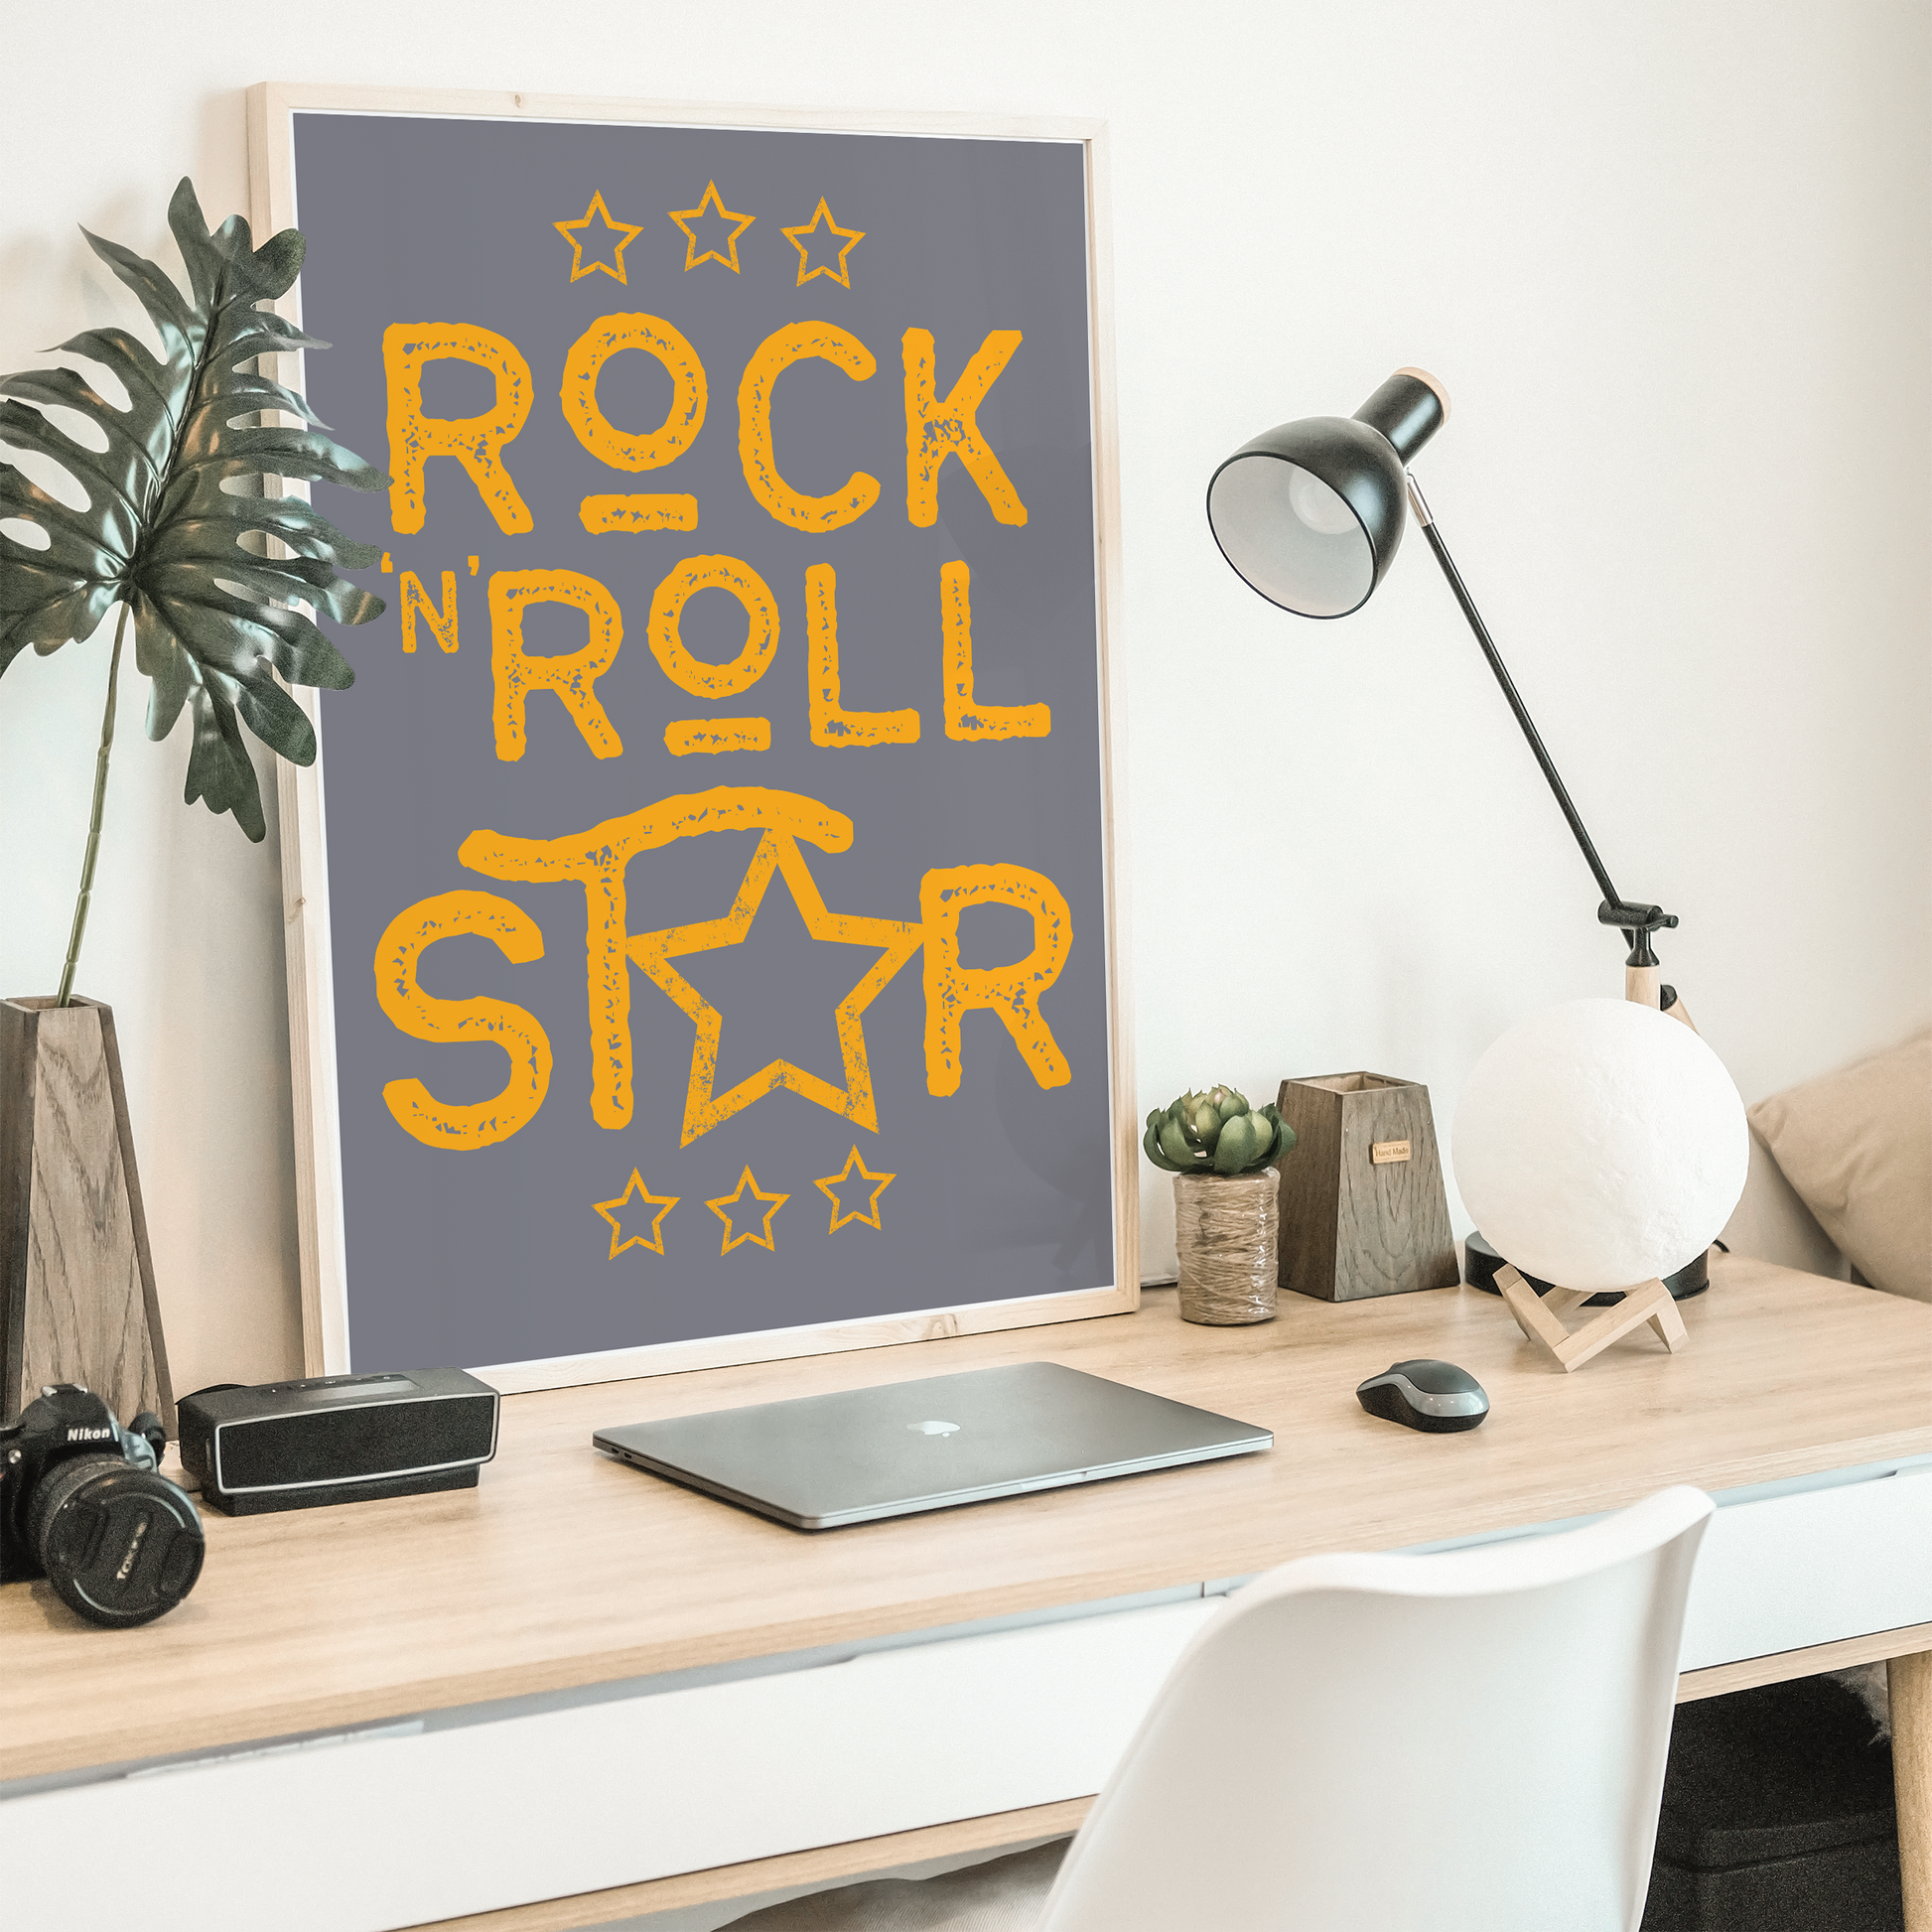 Oasis Wall Art Poster Print Rock and Roll Star framed on desk